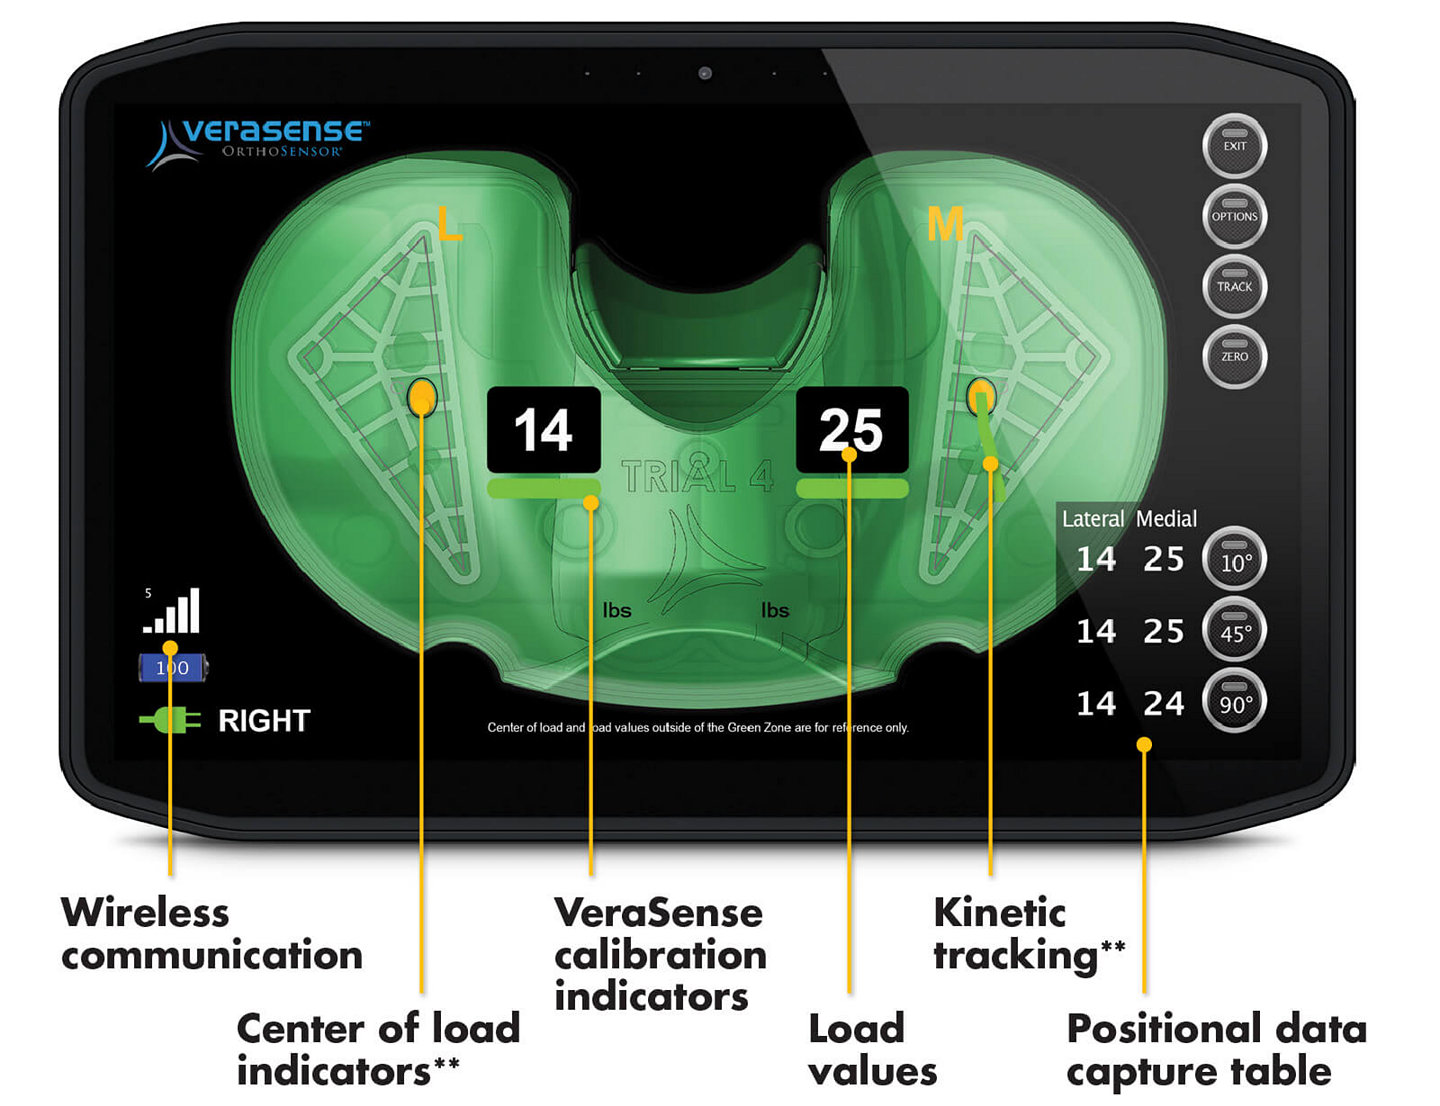 From left to right: Wireless communications, Center of load indicators**, VeraSense calibration indicators, Load values, Kinetic tracking**, Positional data capture table